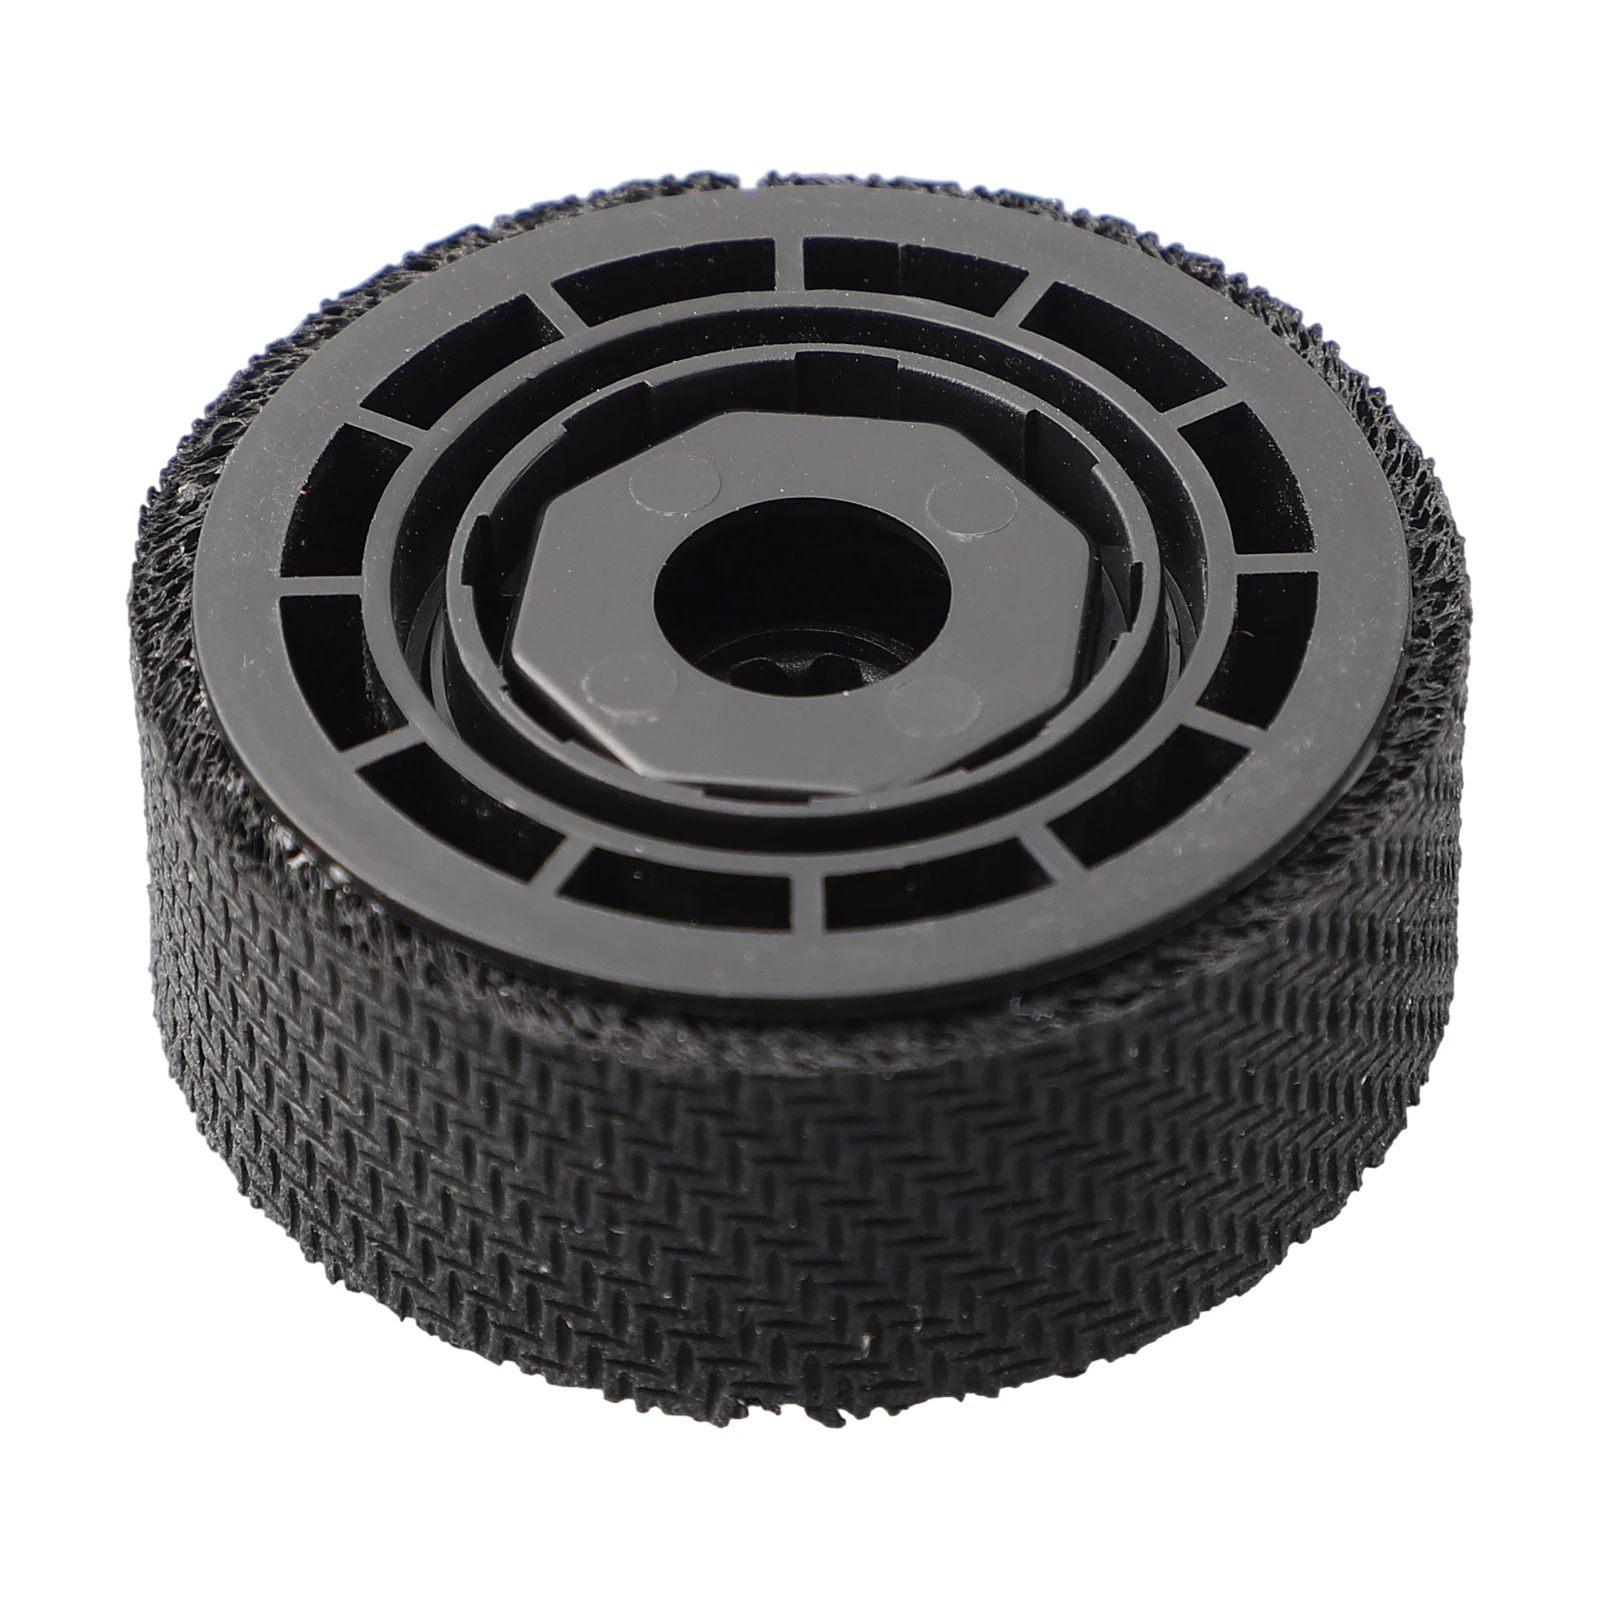 

Reliable Replacement Wheel Tires For Braava For Jet M6 (6110) (6012) (6112) Easy Installation Enhance Cleaning Efficiency